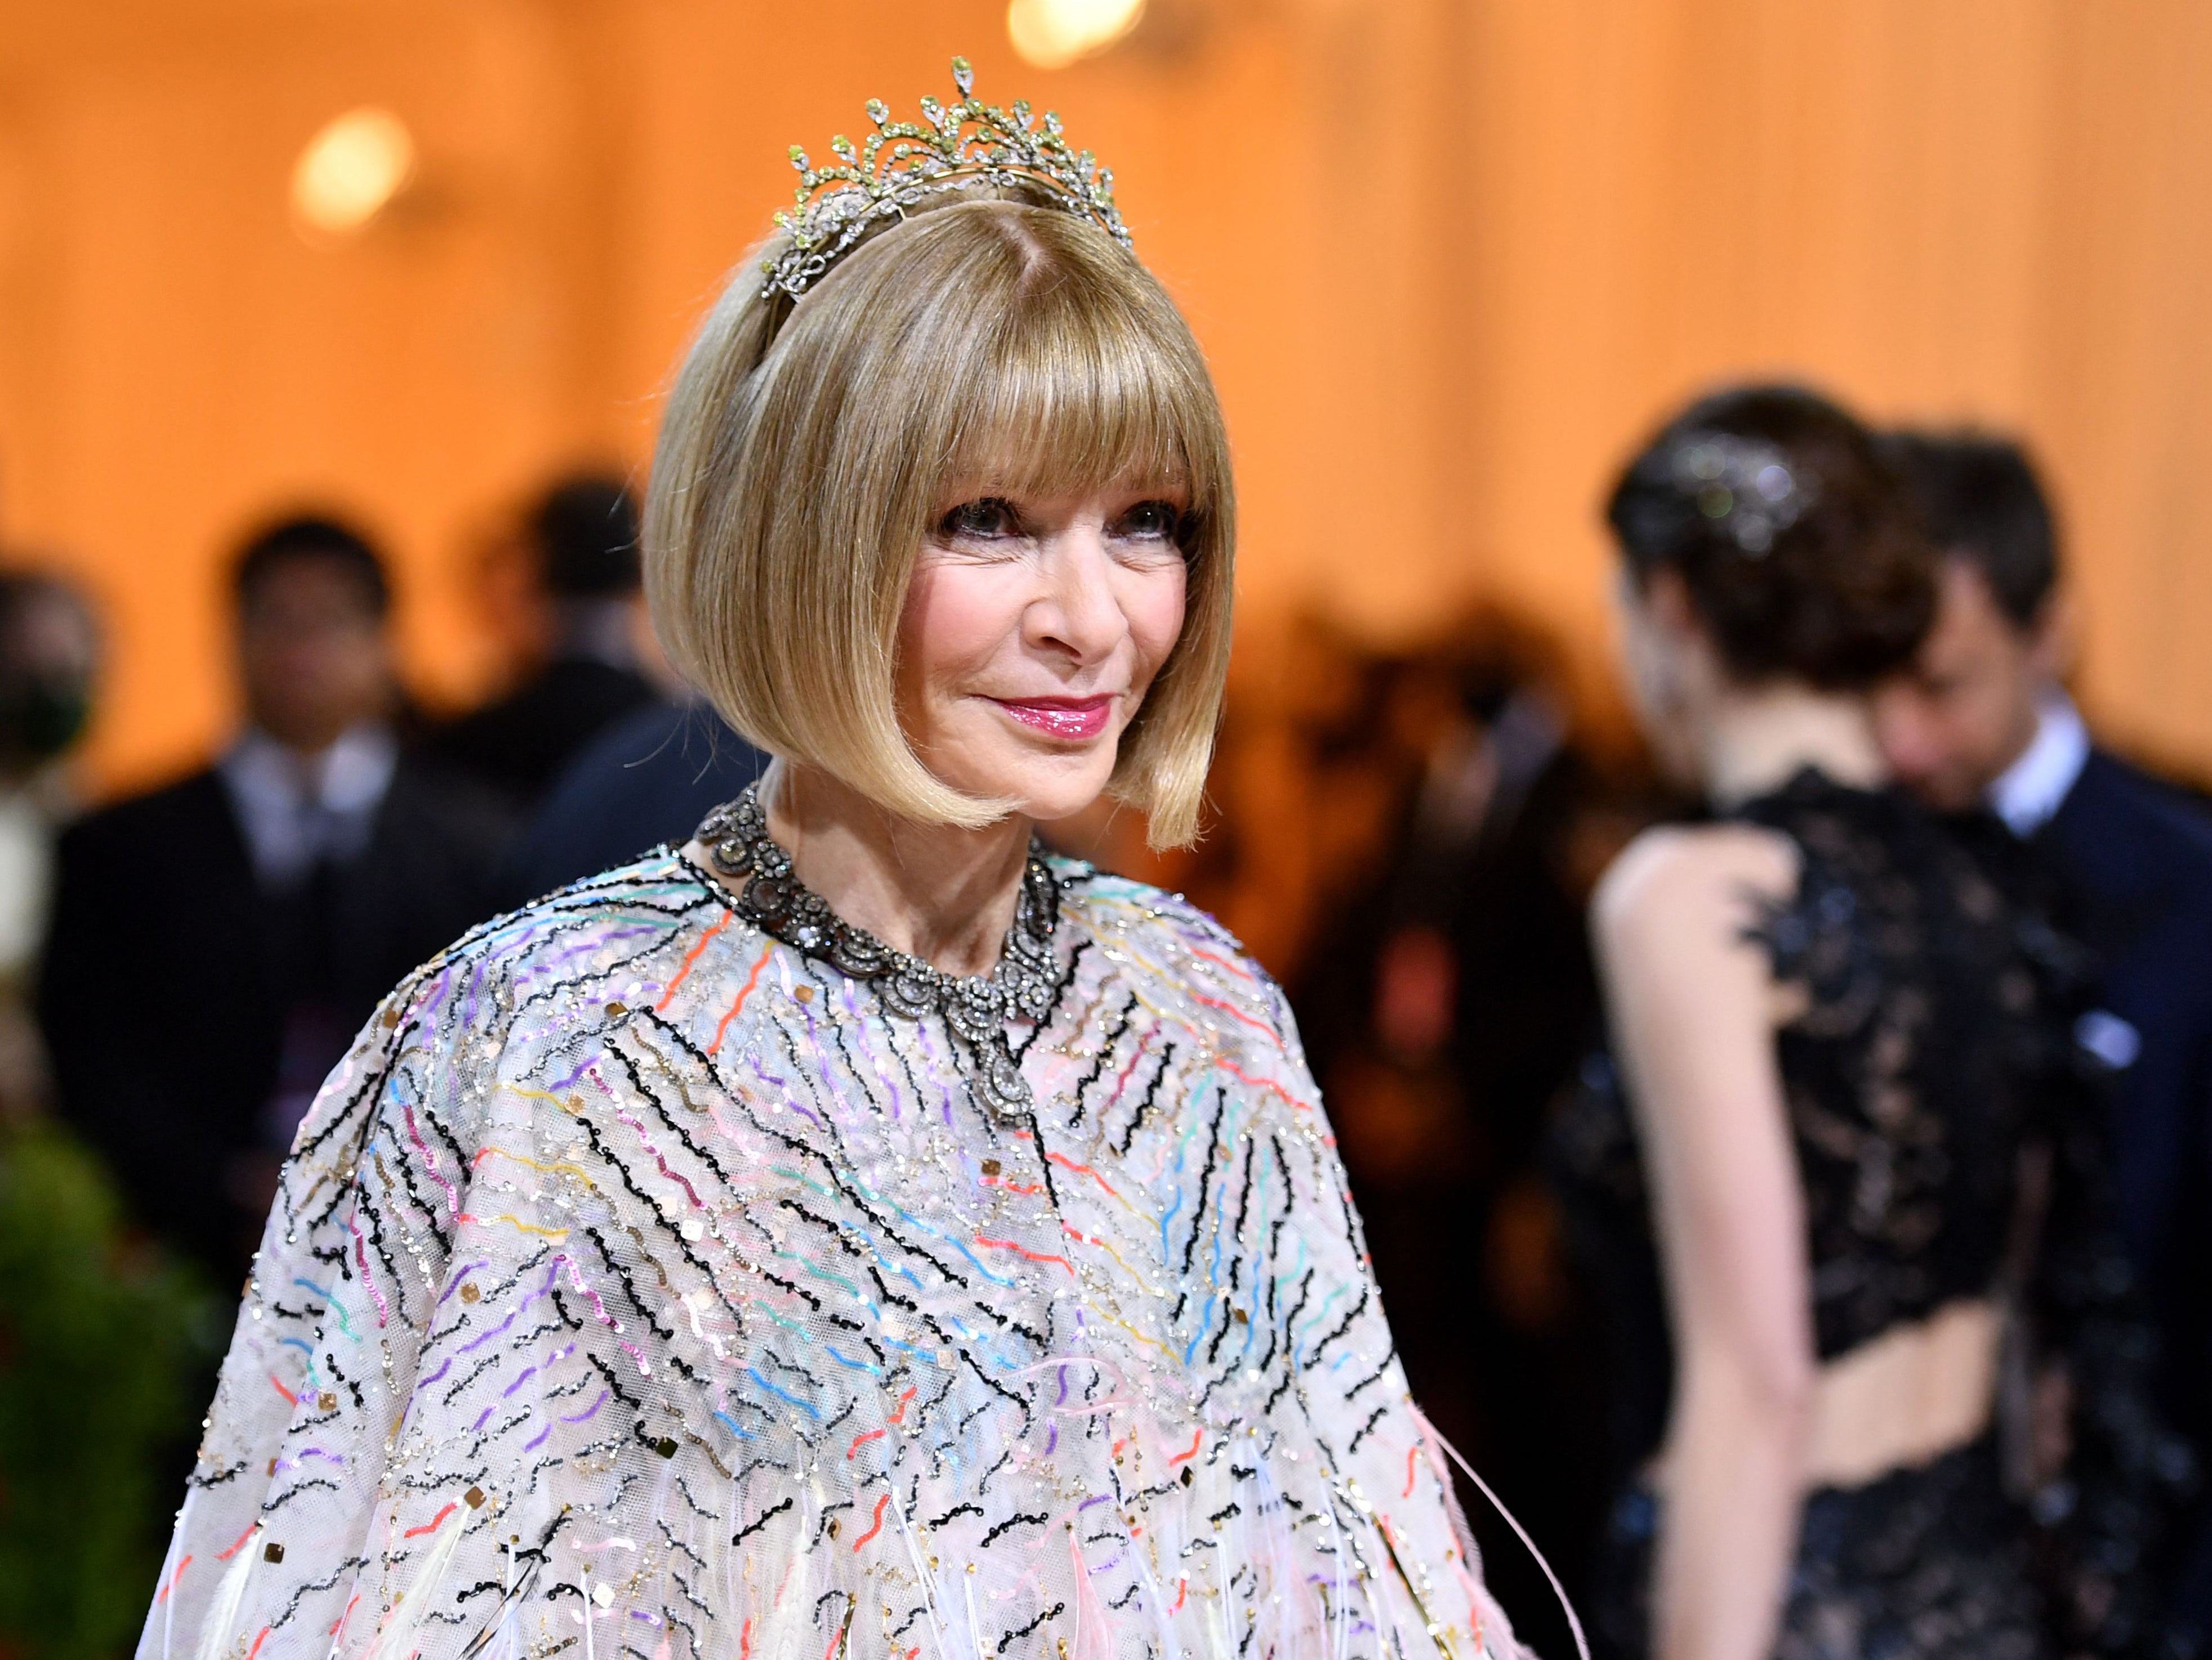 Anna Wintour has been editor-in-Chief of Vogue since 1988